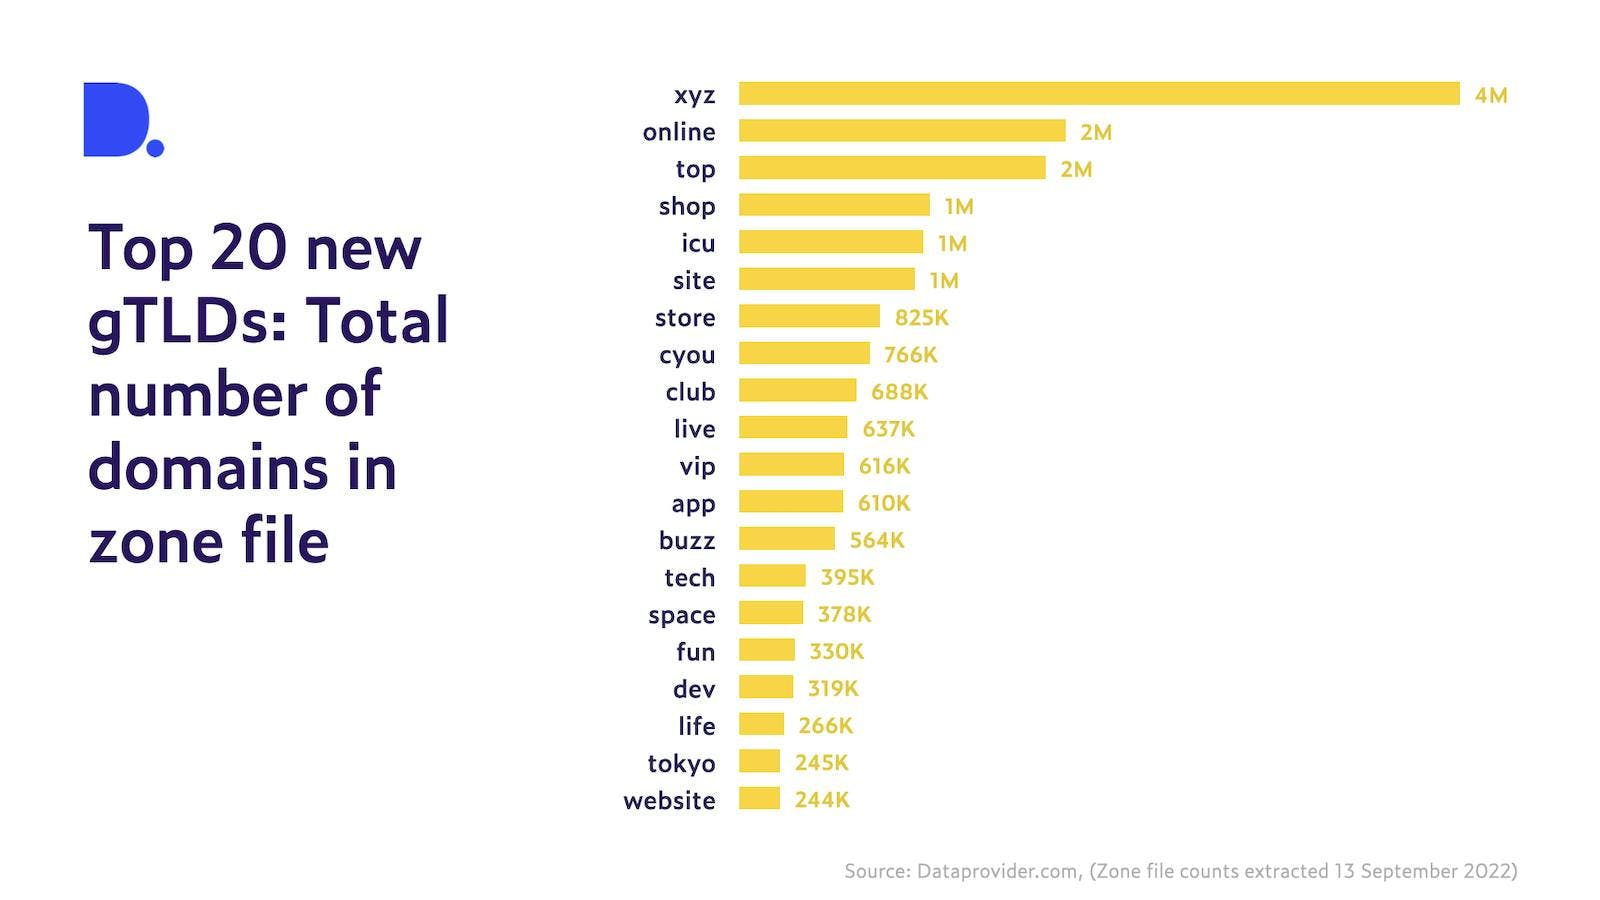 Top 20 new generic top-level domains. .XYZ is #1 with 4 million. .Online and .top come in with 2 million both.